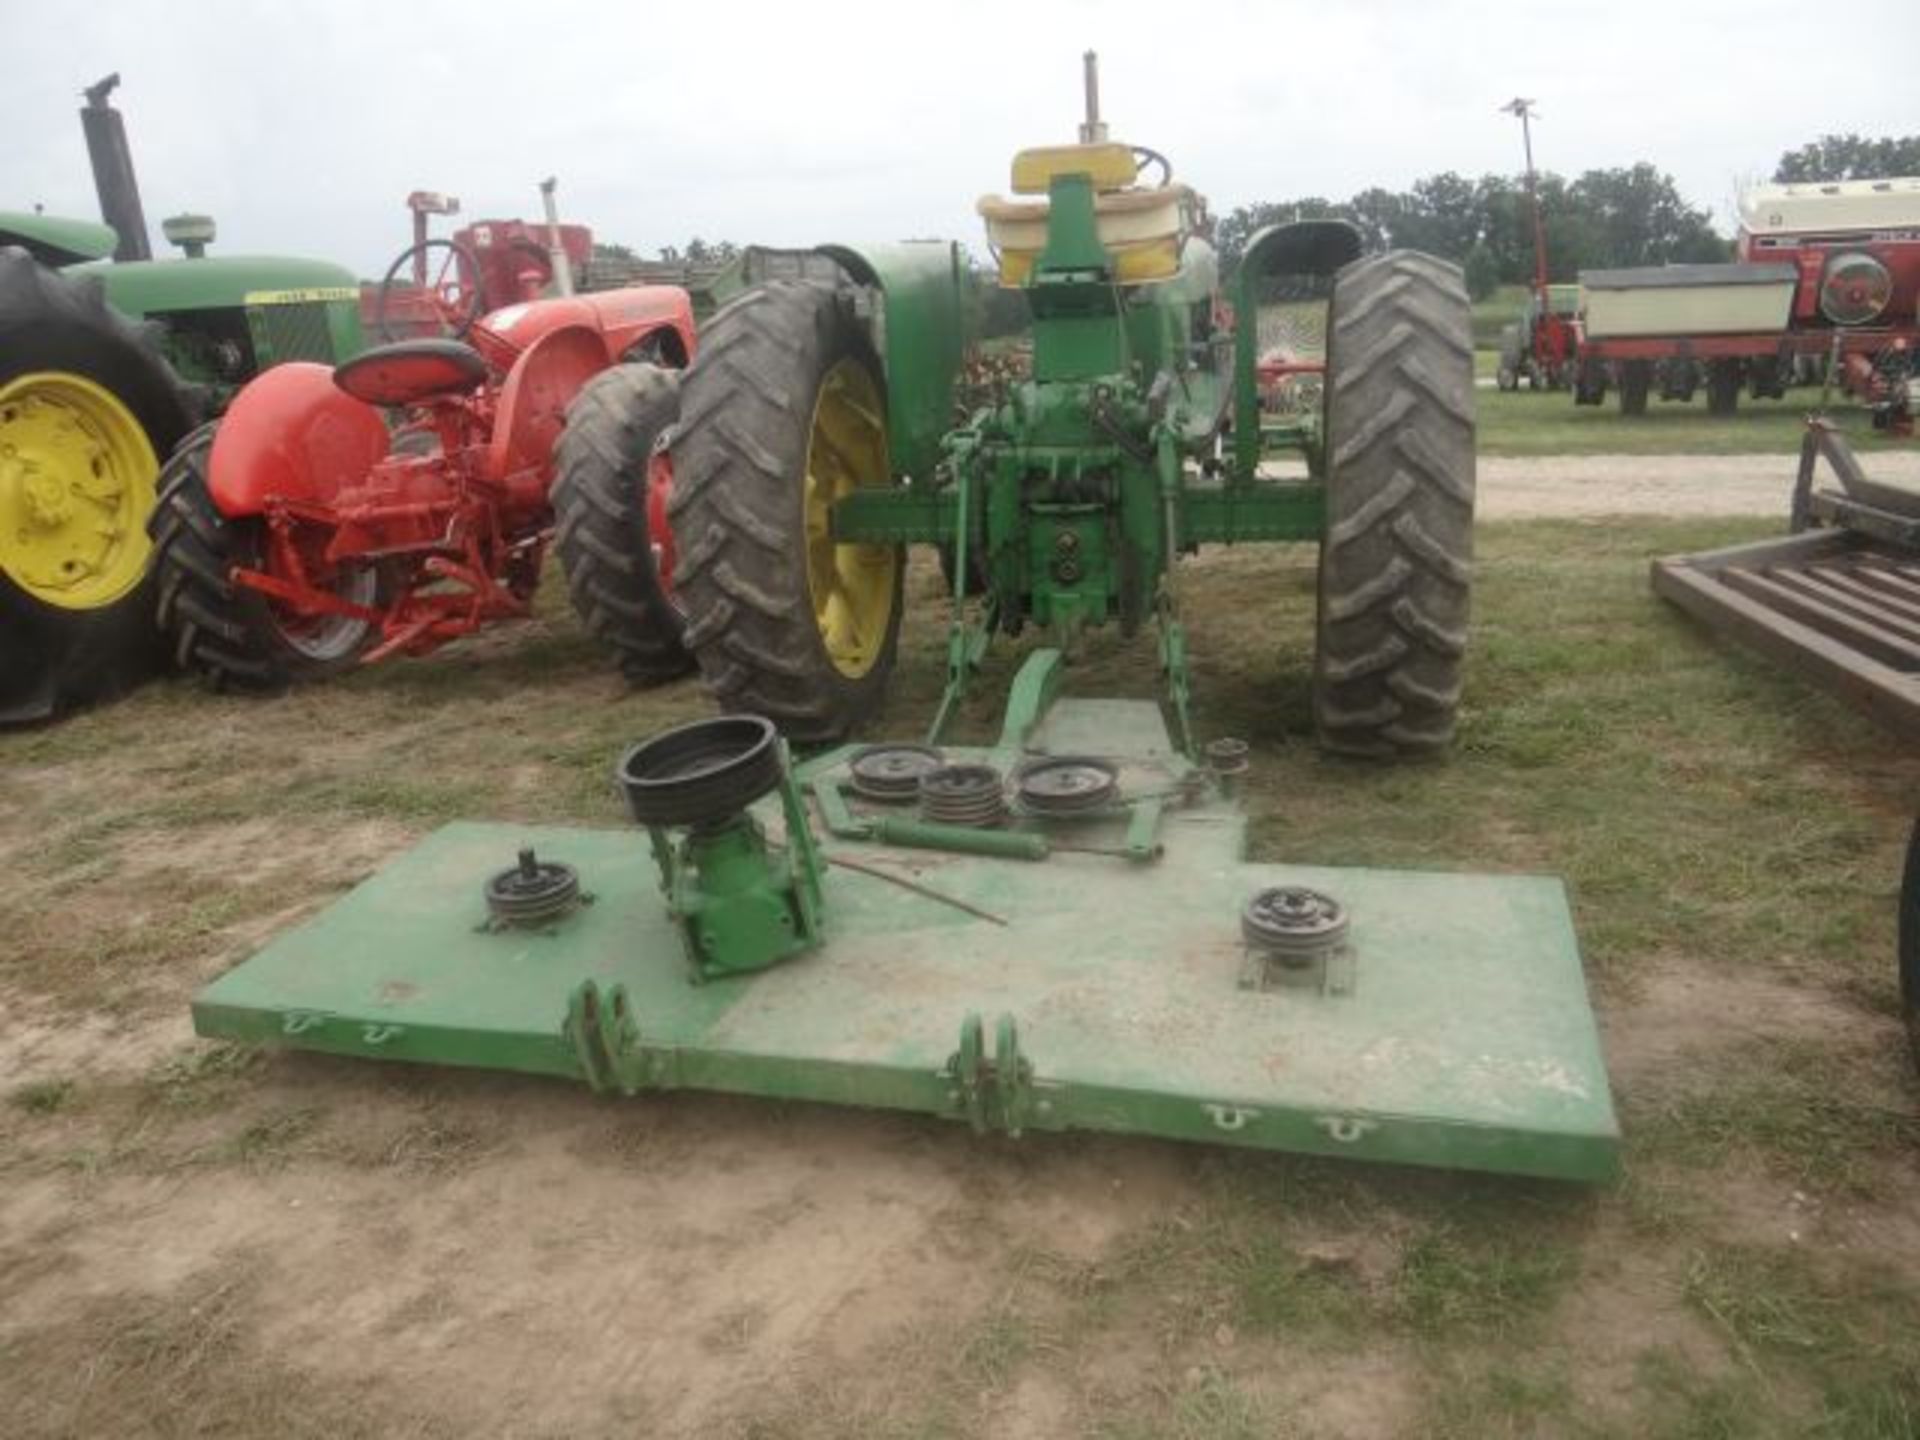 JD 2010 Tractor Gas, Row Crop, WF, Syncro, 3pt, 13.9x36 Tires, w/Mid Mount Mower - Image 4 of 4